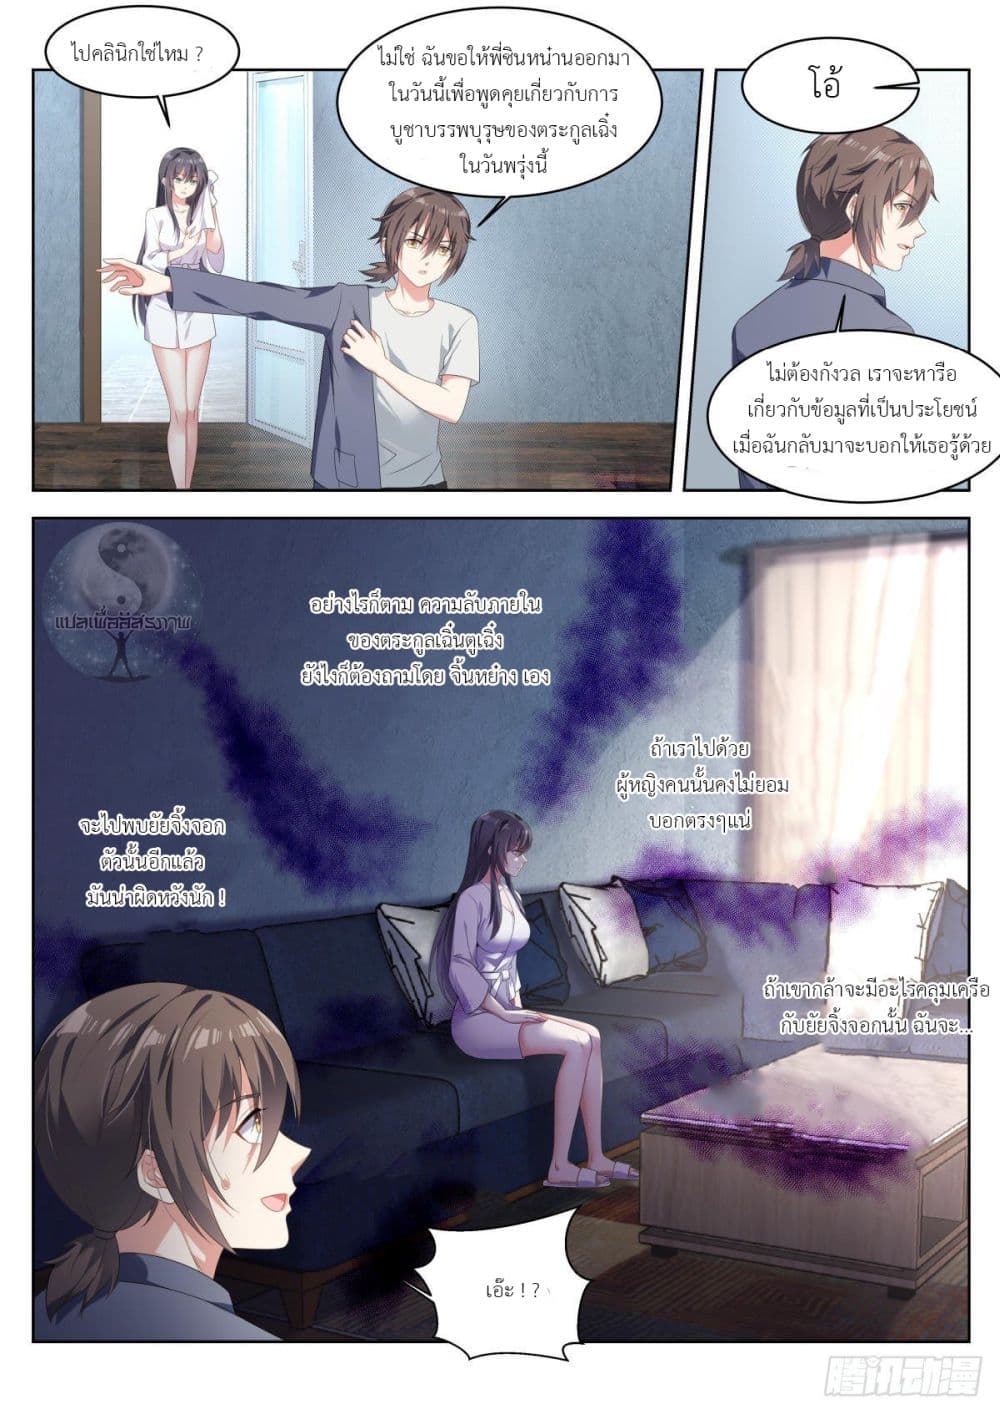 Miss, Something's Wrong With You สาวน้อยคุณคิดผิดแล้ว 22-22